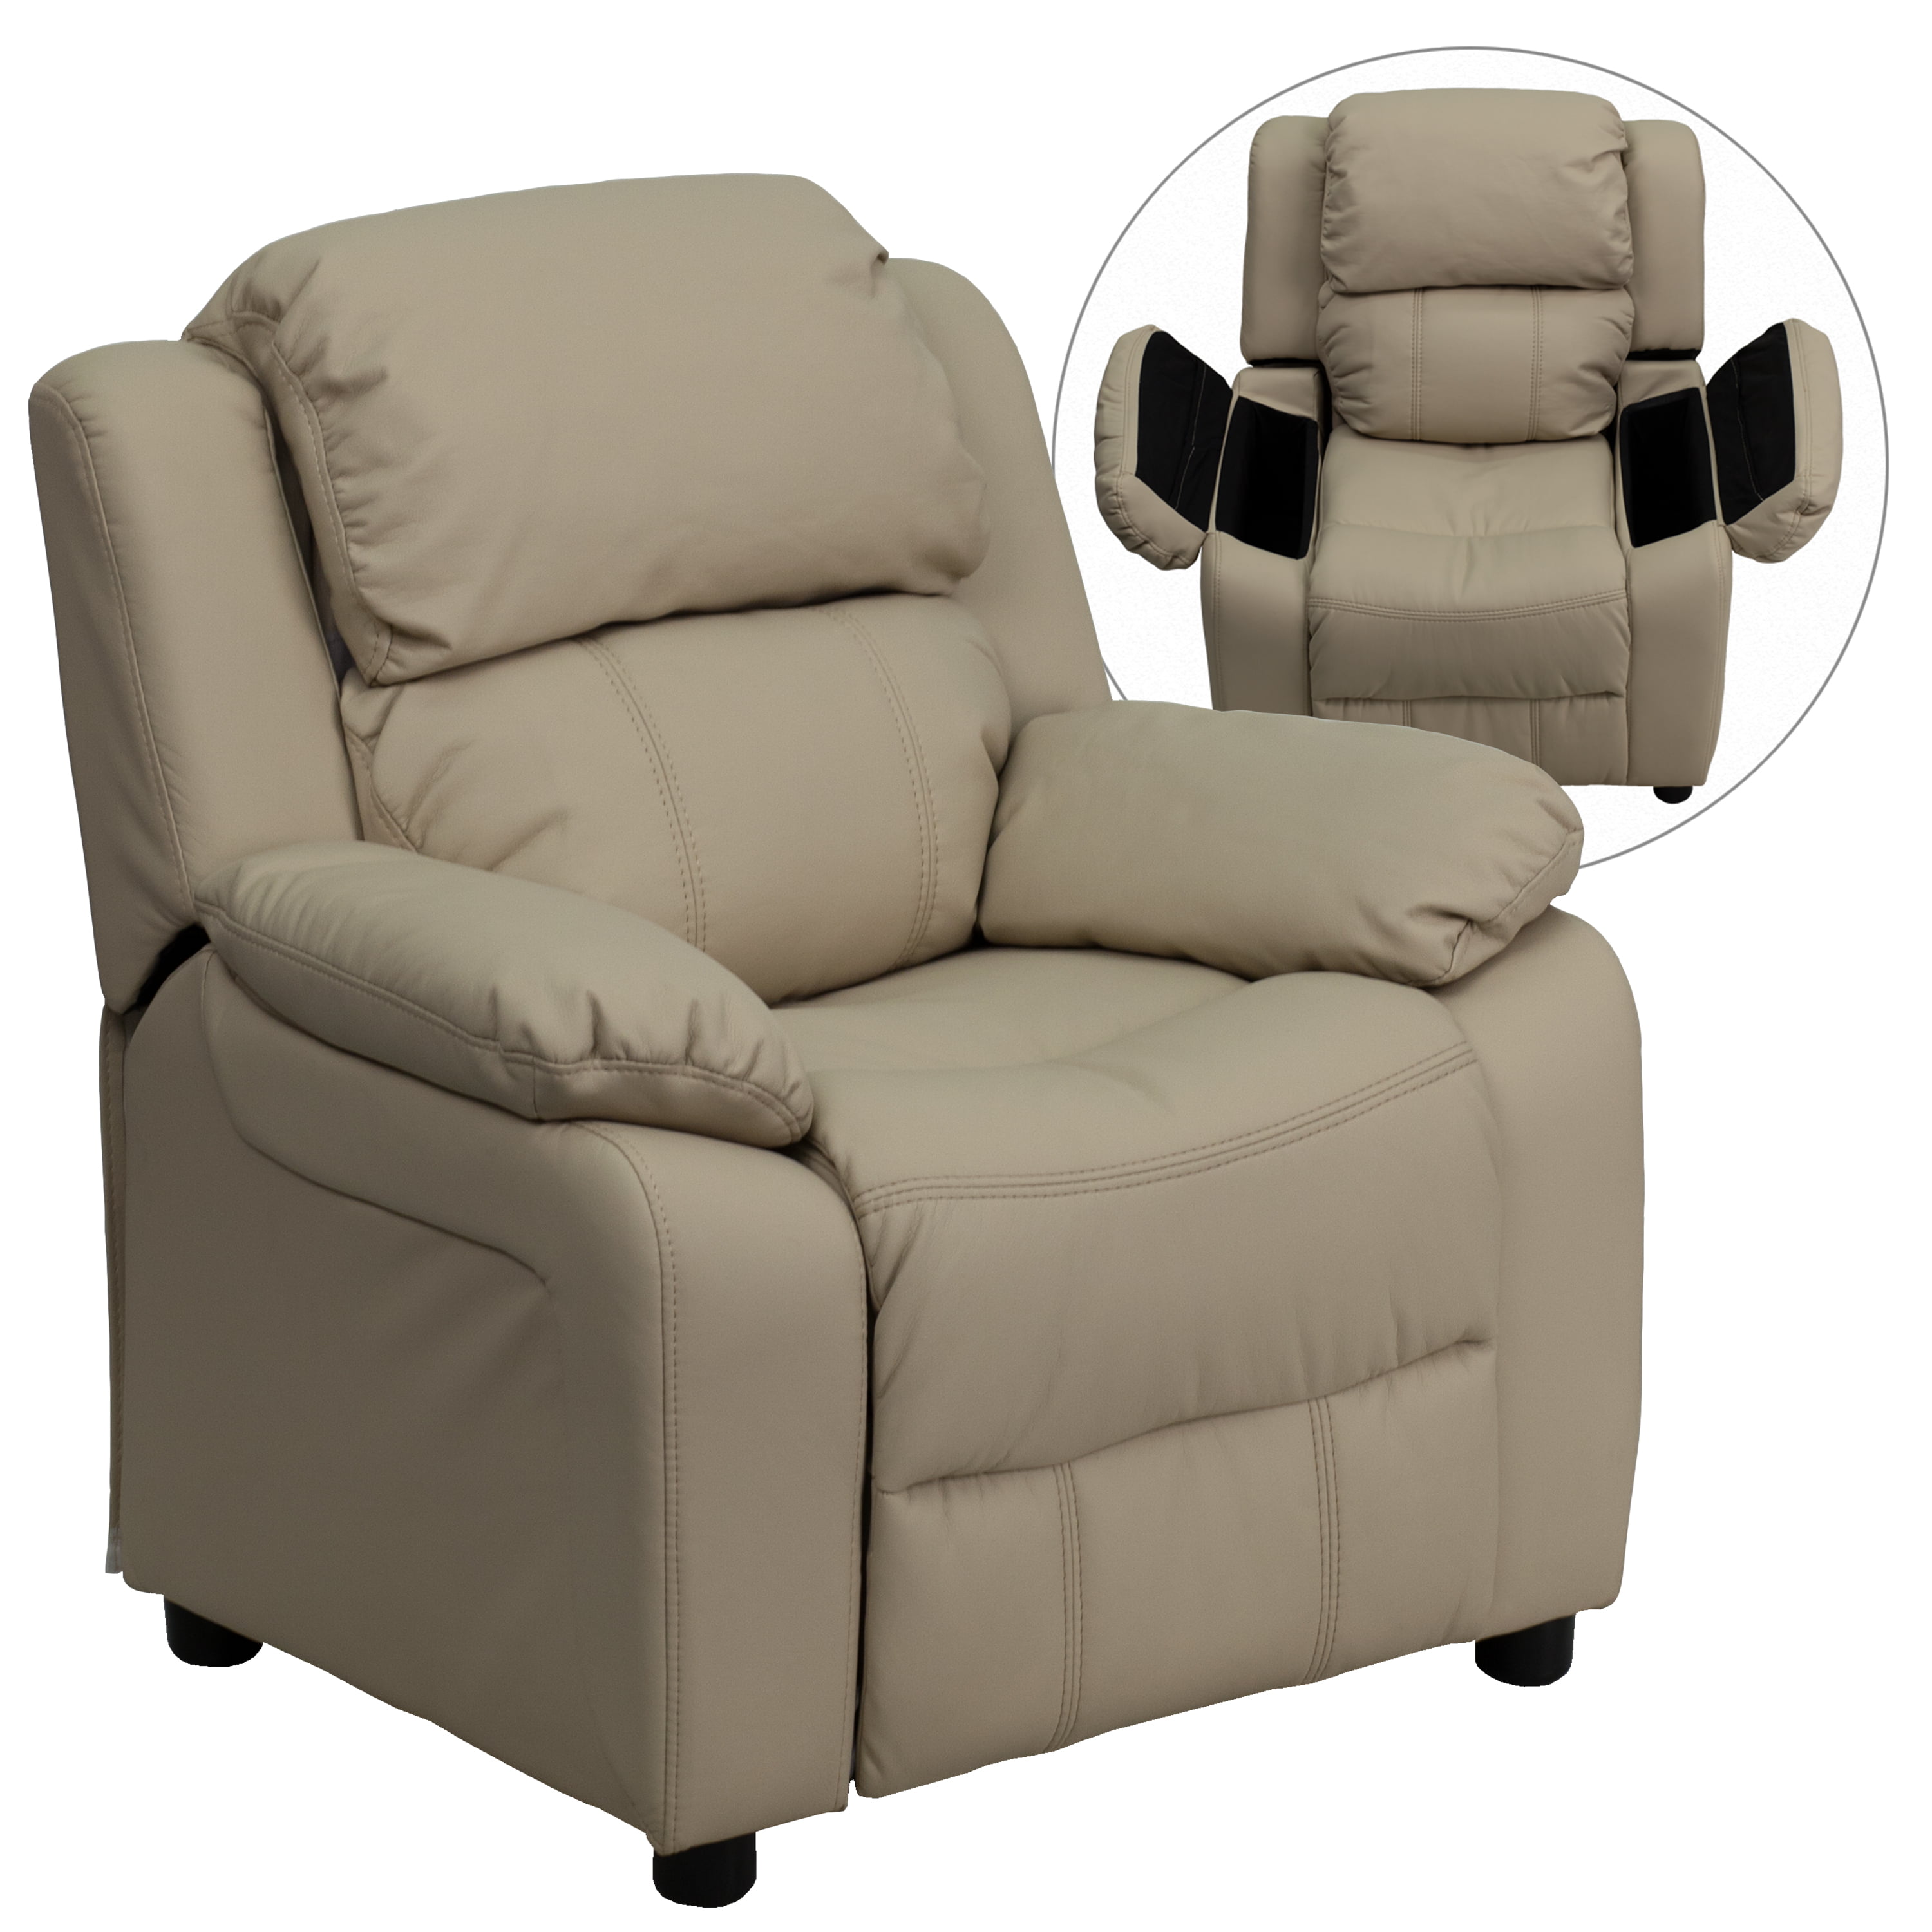 Flash Furniture Deluxe Padded Contemporary Beige Vinyl Kids Recliner with Storage Arms - image 2 of 13